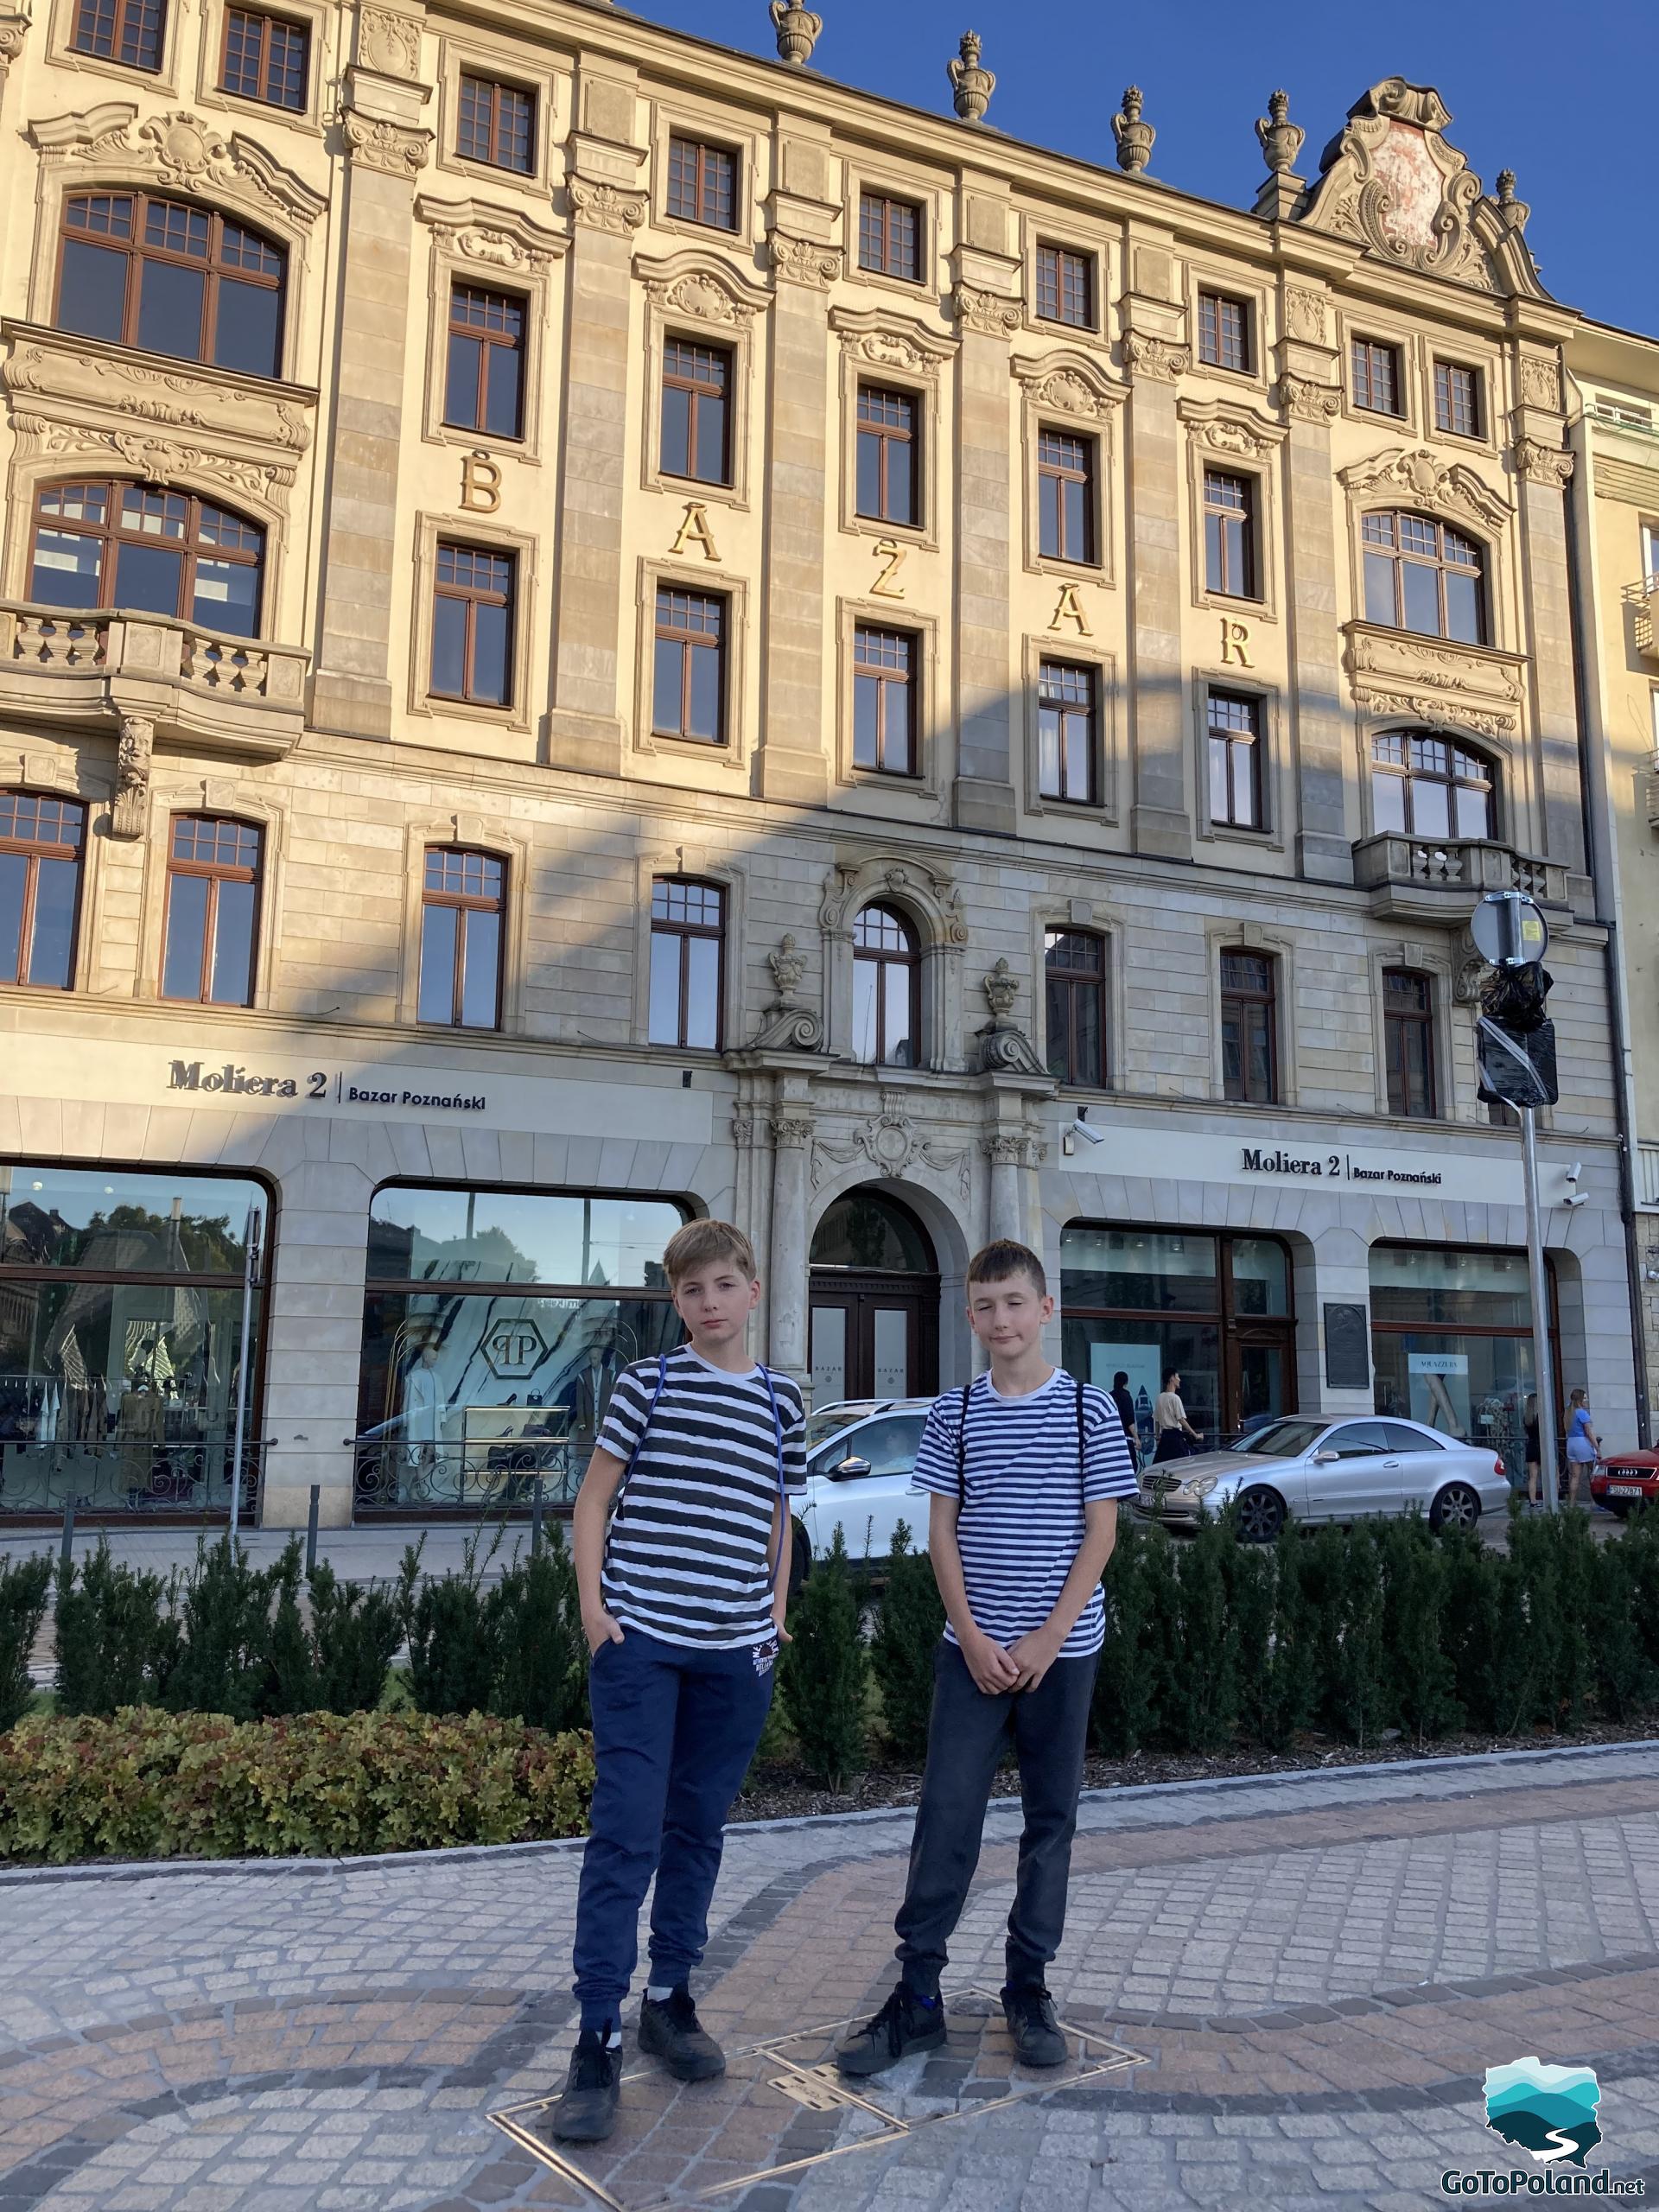 two boys standing in front of an old building where the hotel is located